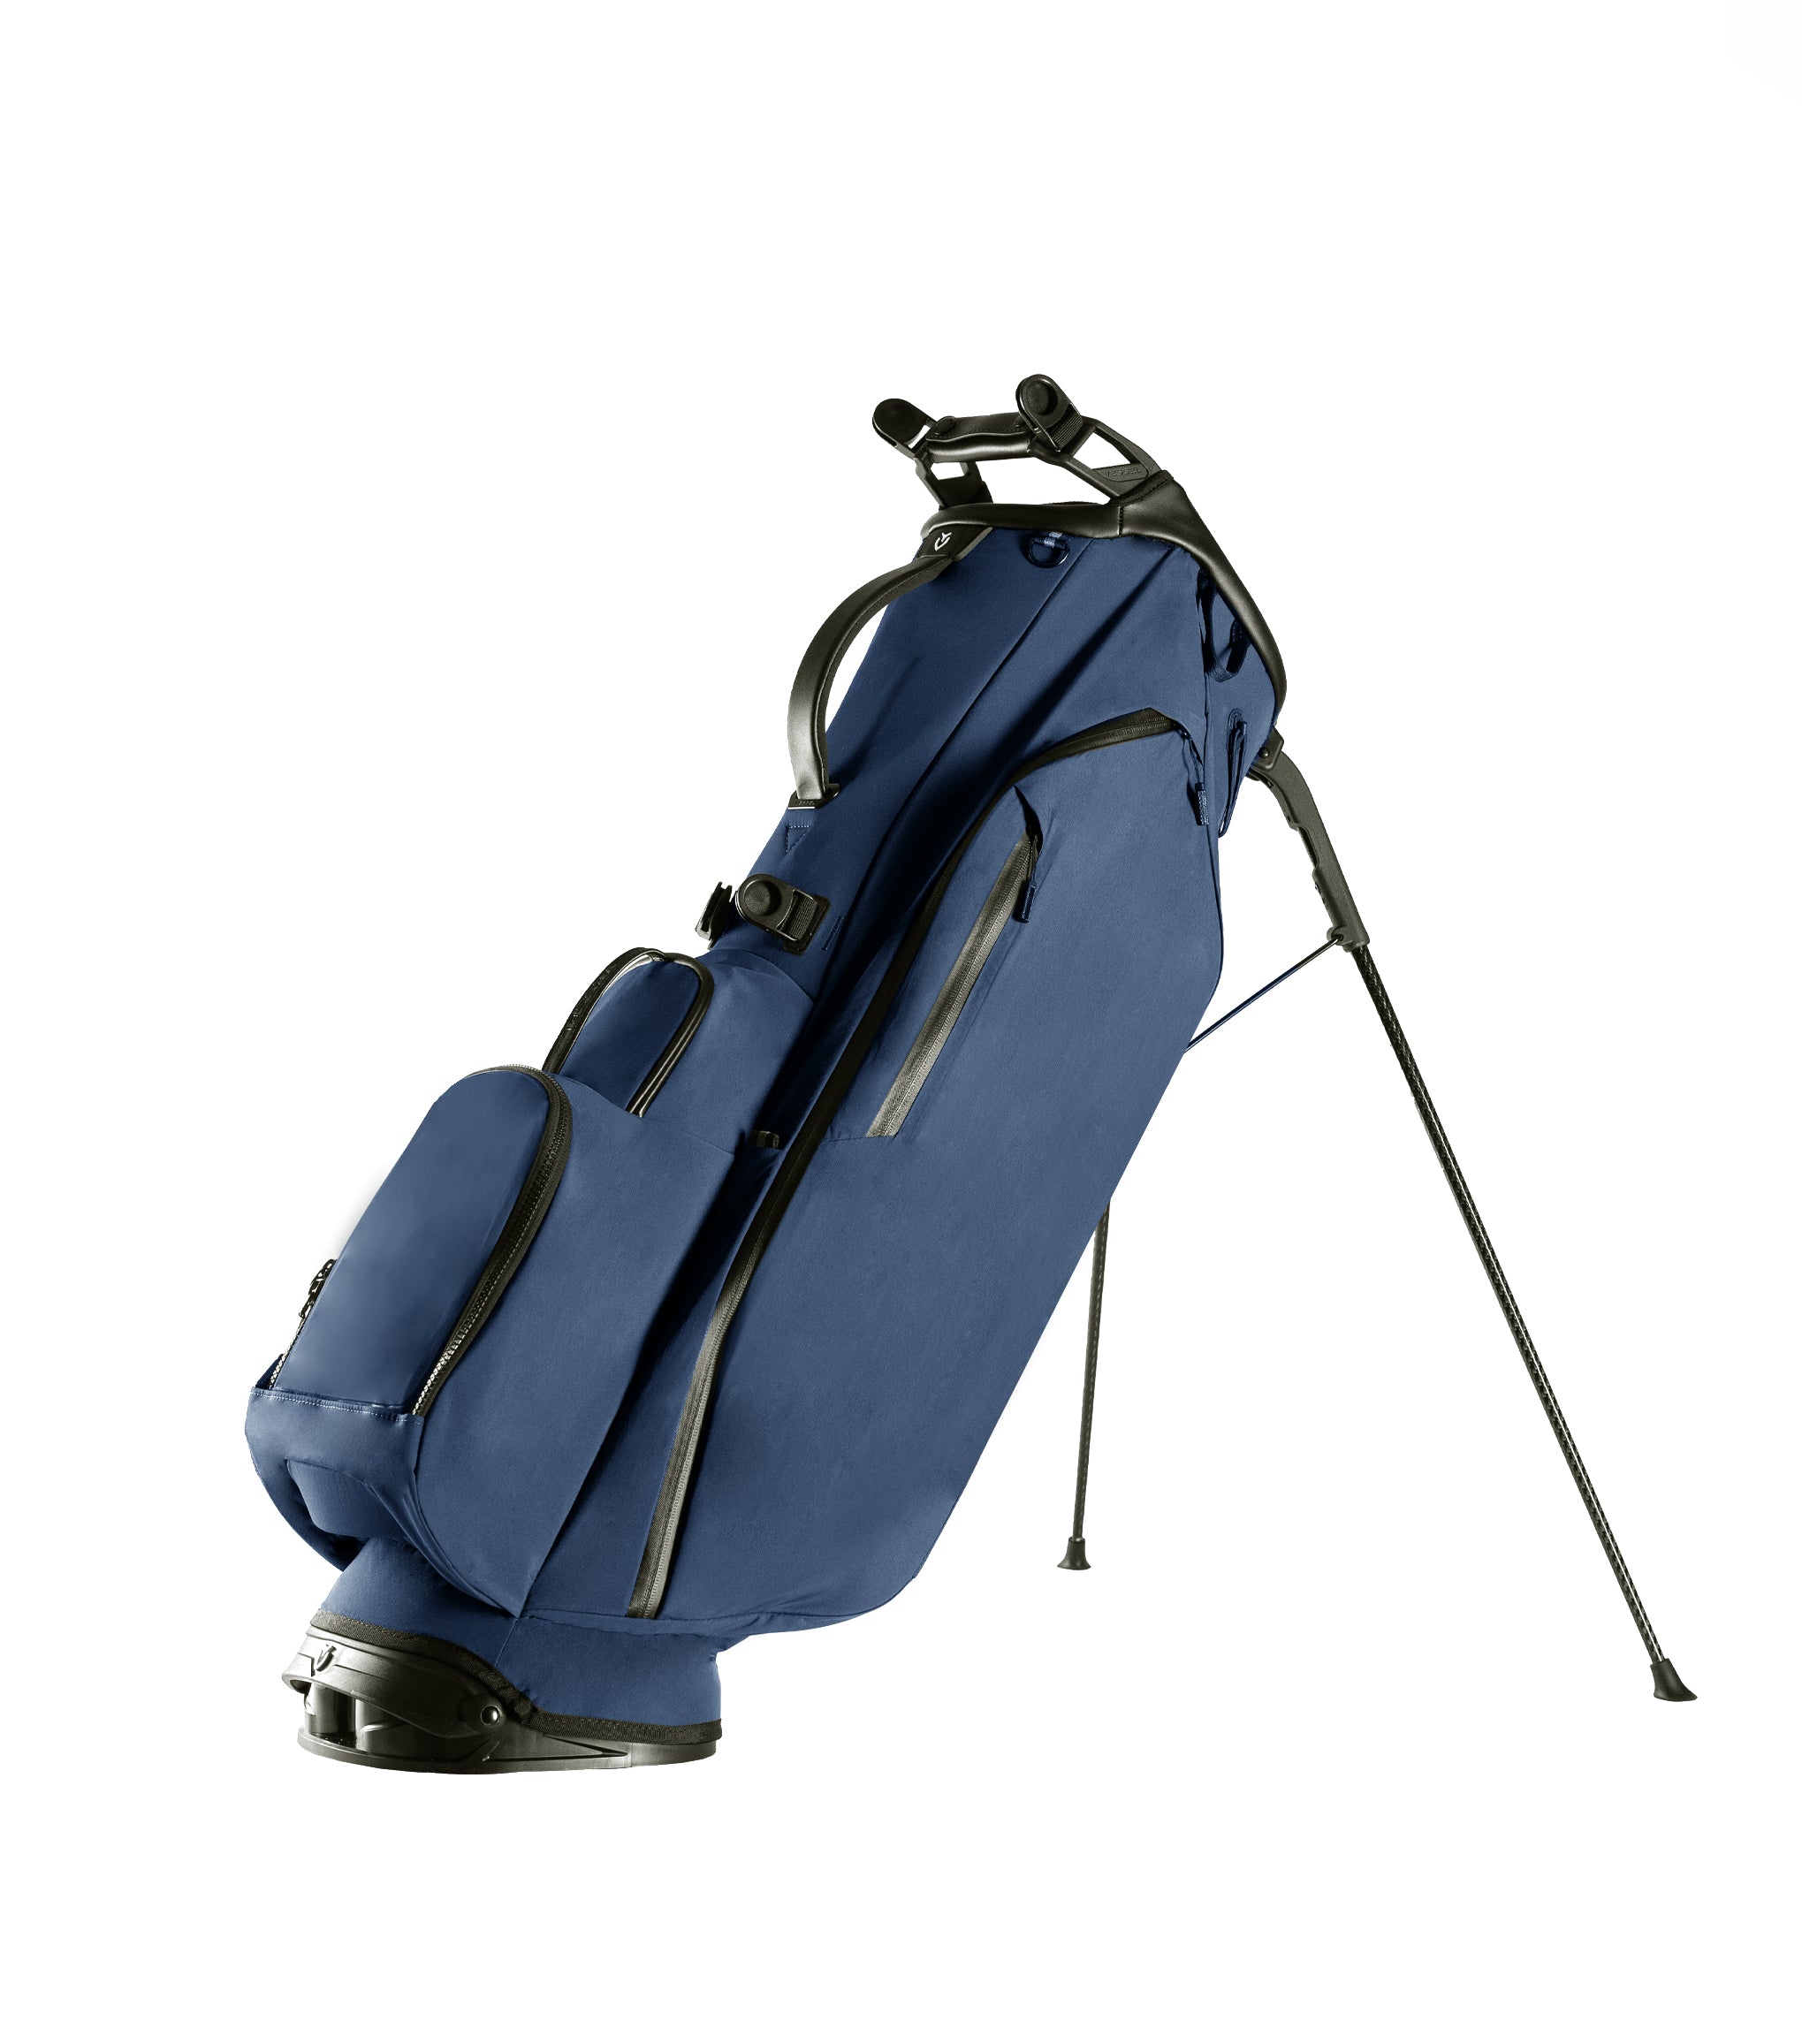 Light Weight Stand Bags: What to Look for if You Prefer to Carry Your Golf Bag